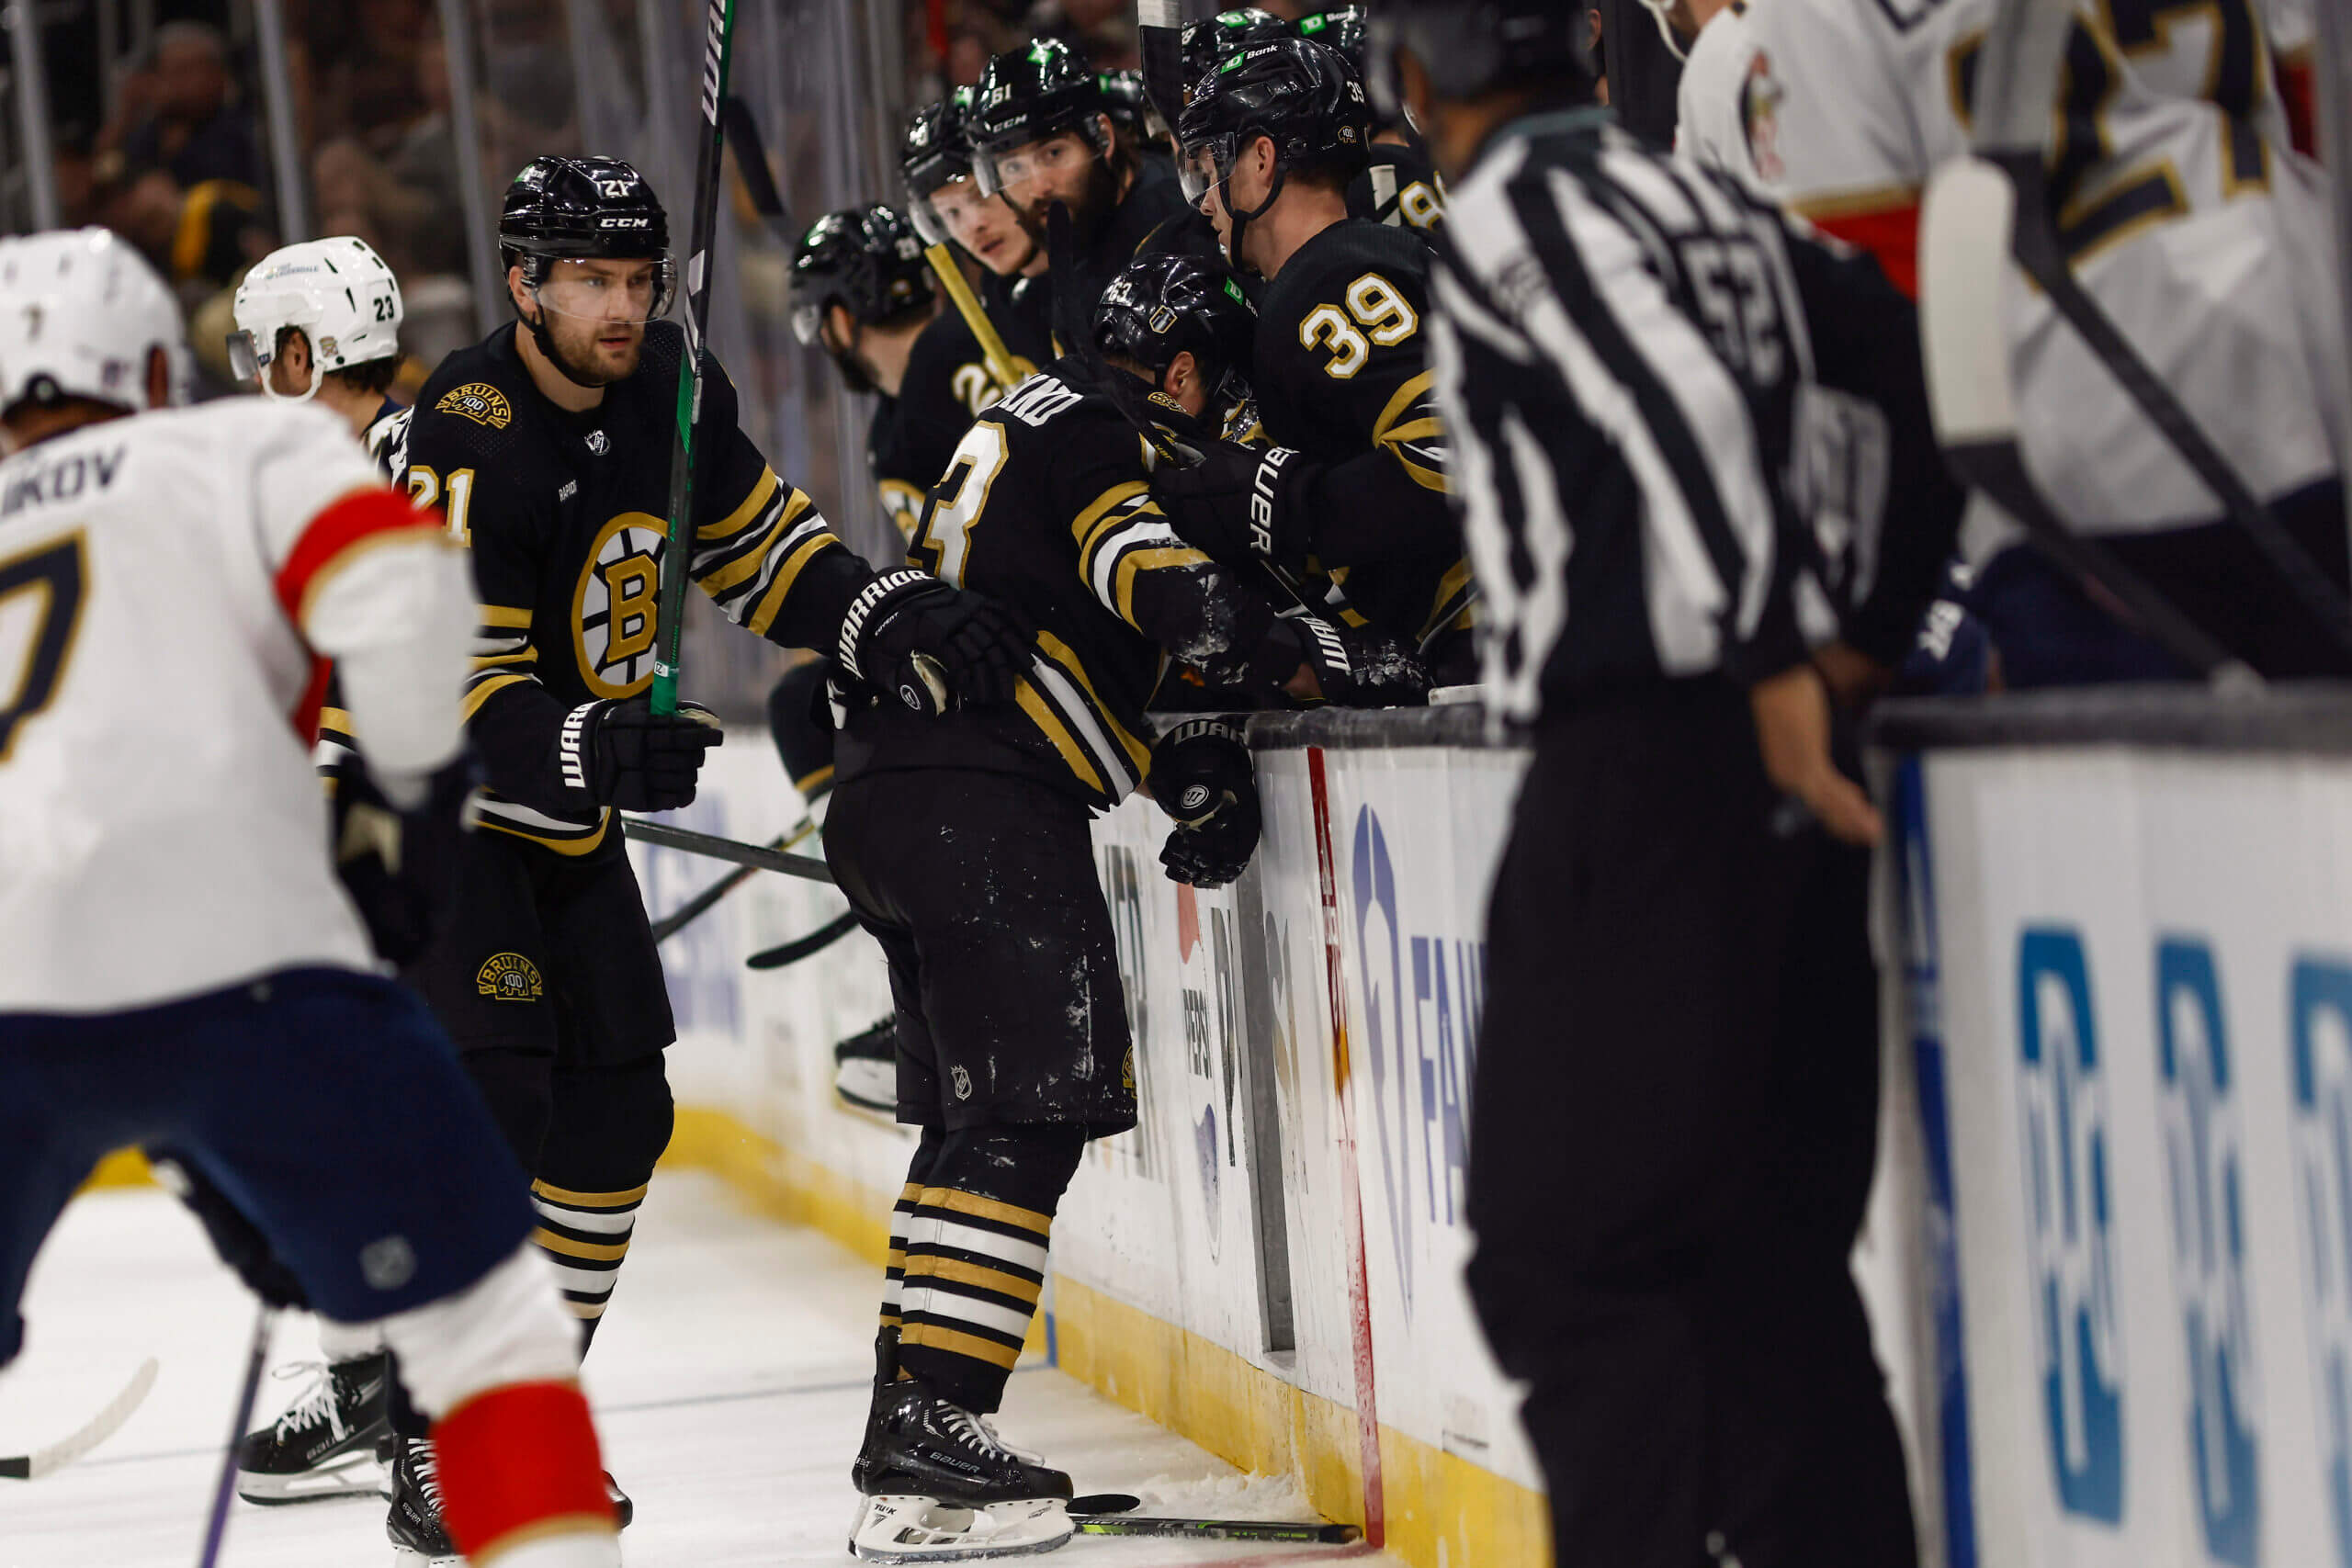 Was Brad Marchand sucker-punched by Panthers' Sam Bennett? Bruins believe 'there's clearly evidence'